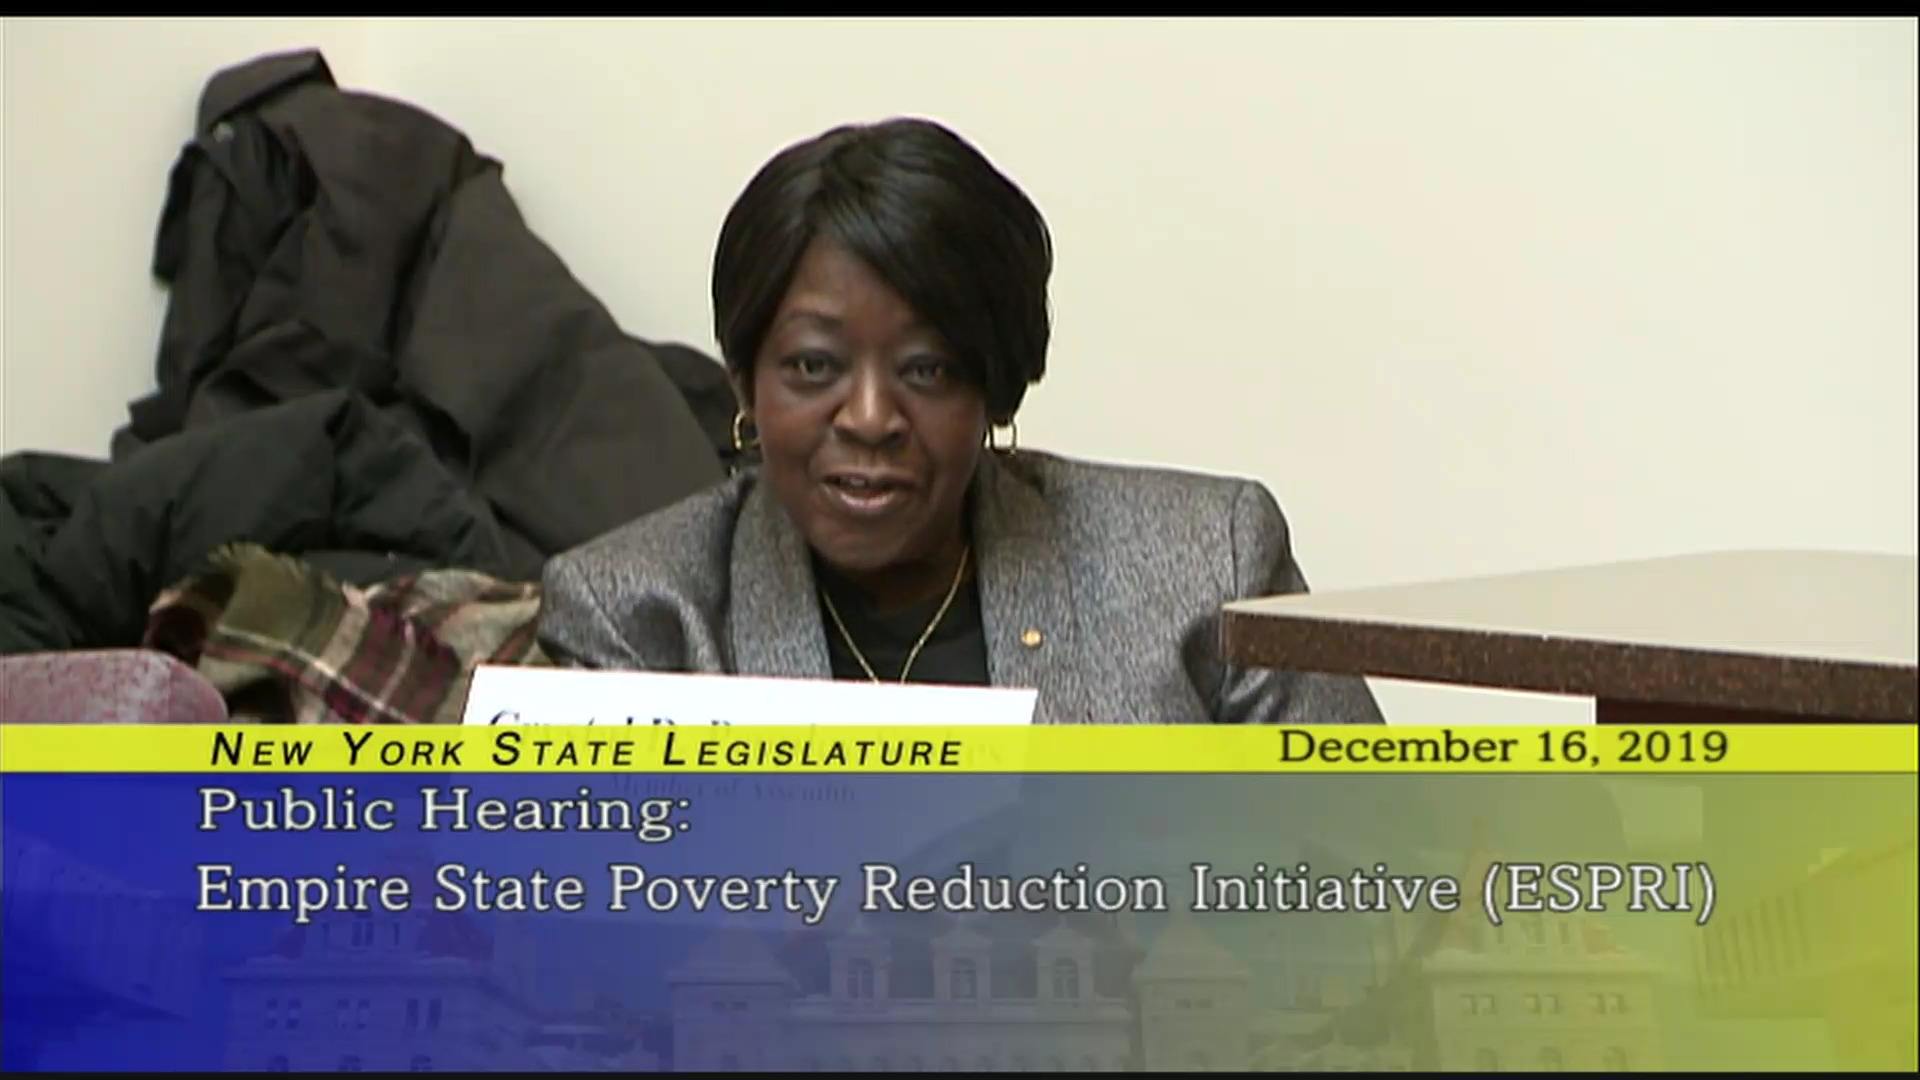 Public Hearing on the Empire State Poverty Reduction Initiative (1)